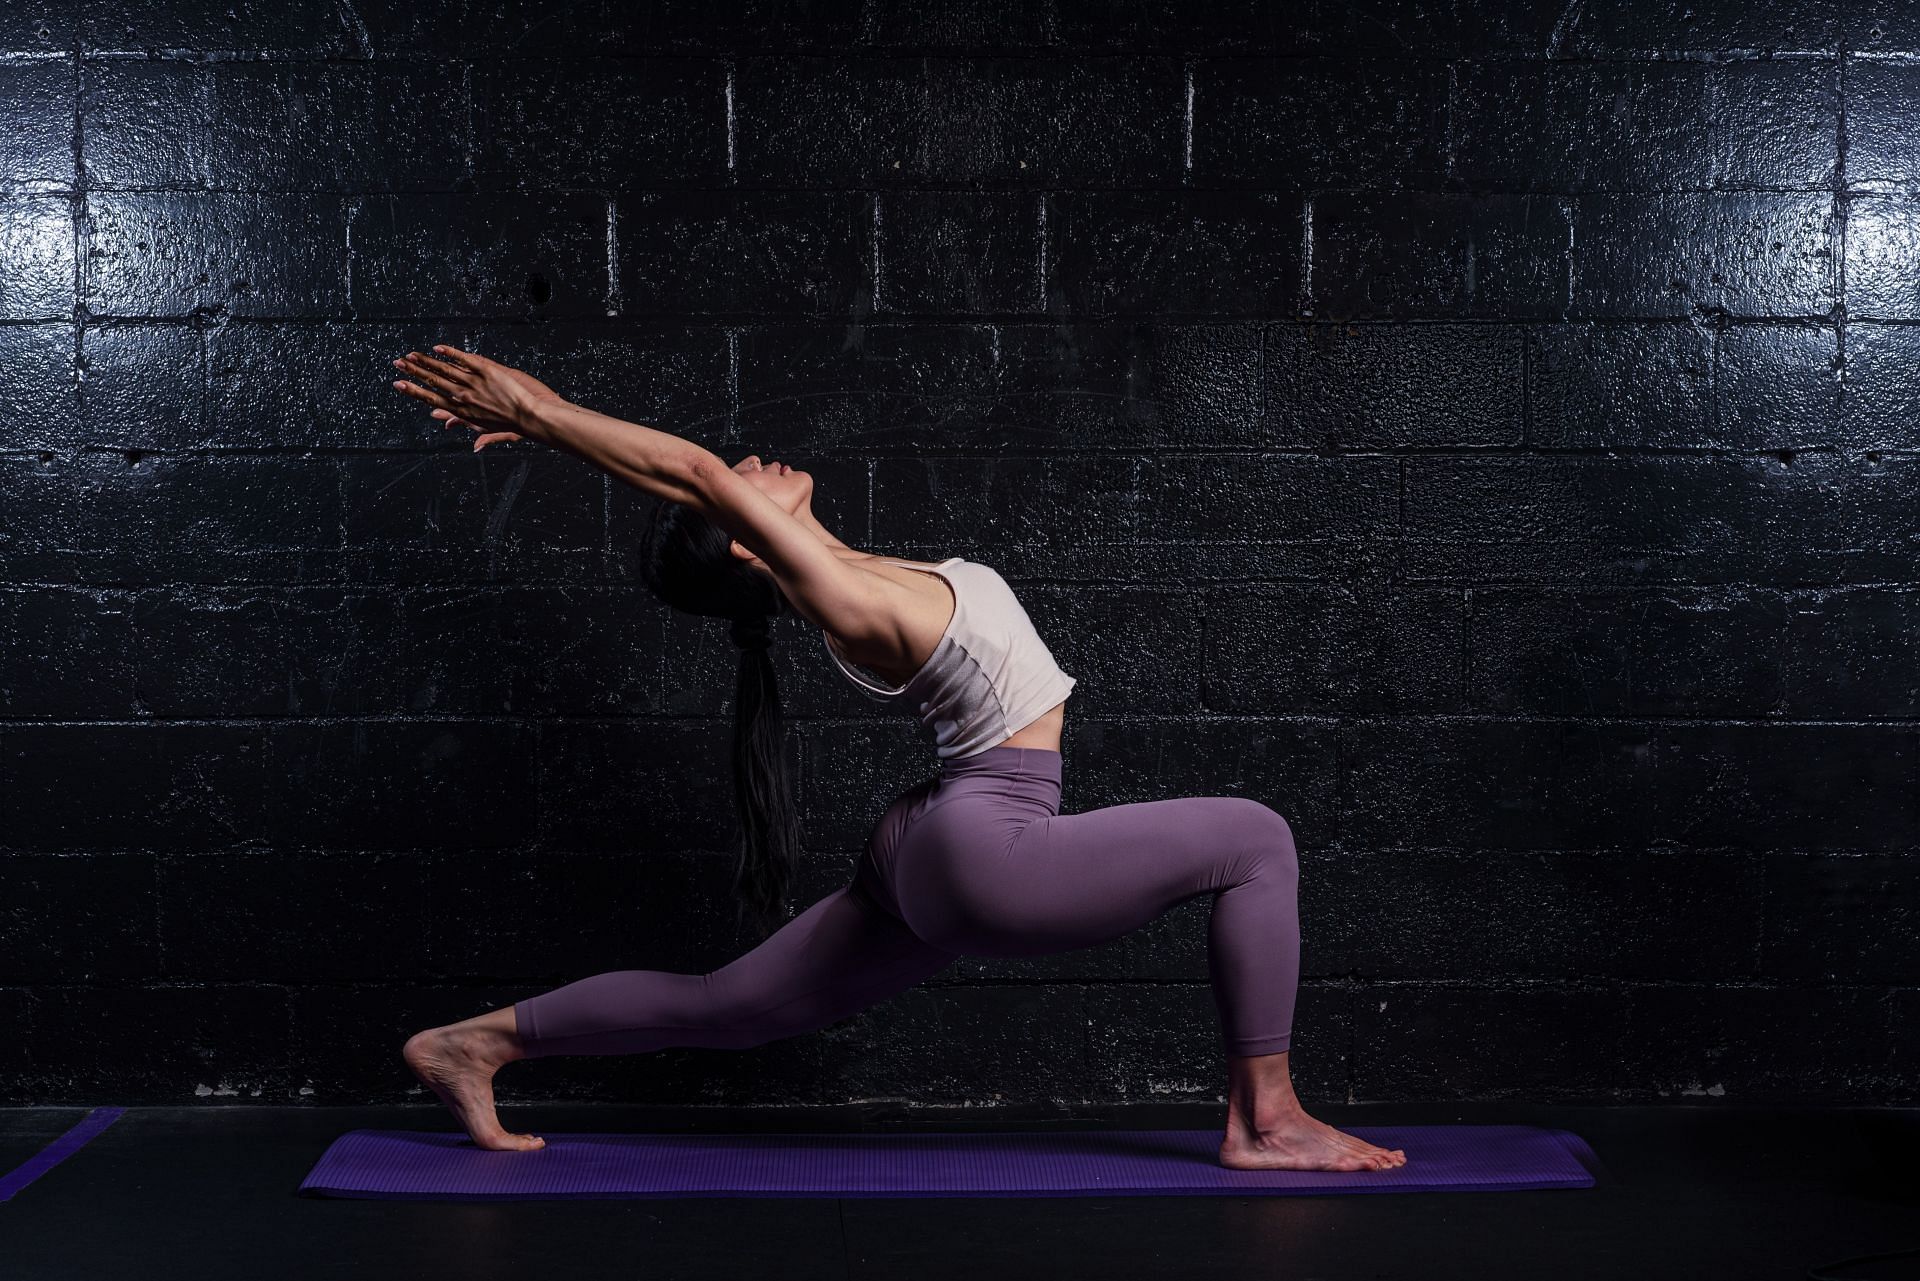 10 Yoga Poses for Health and Immunity That You Can Do at Home